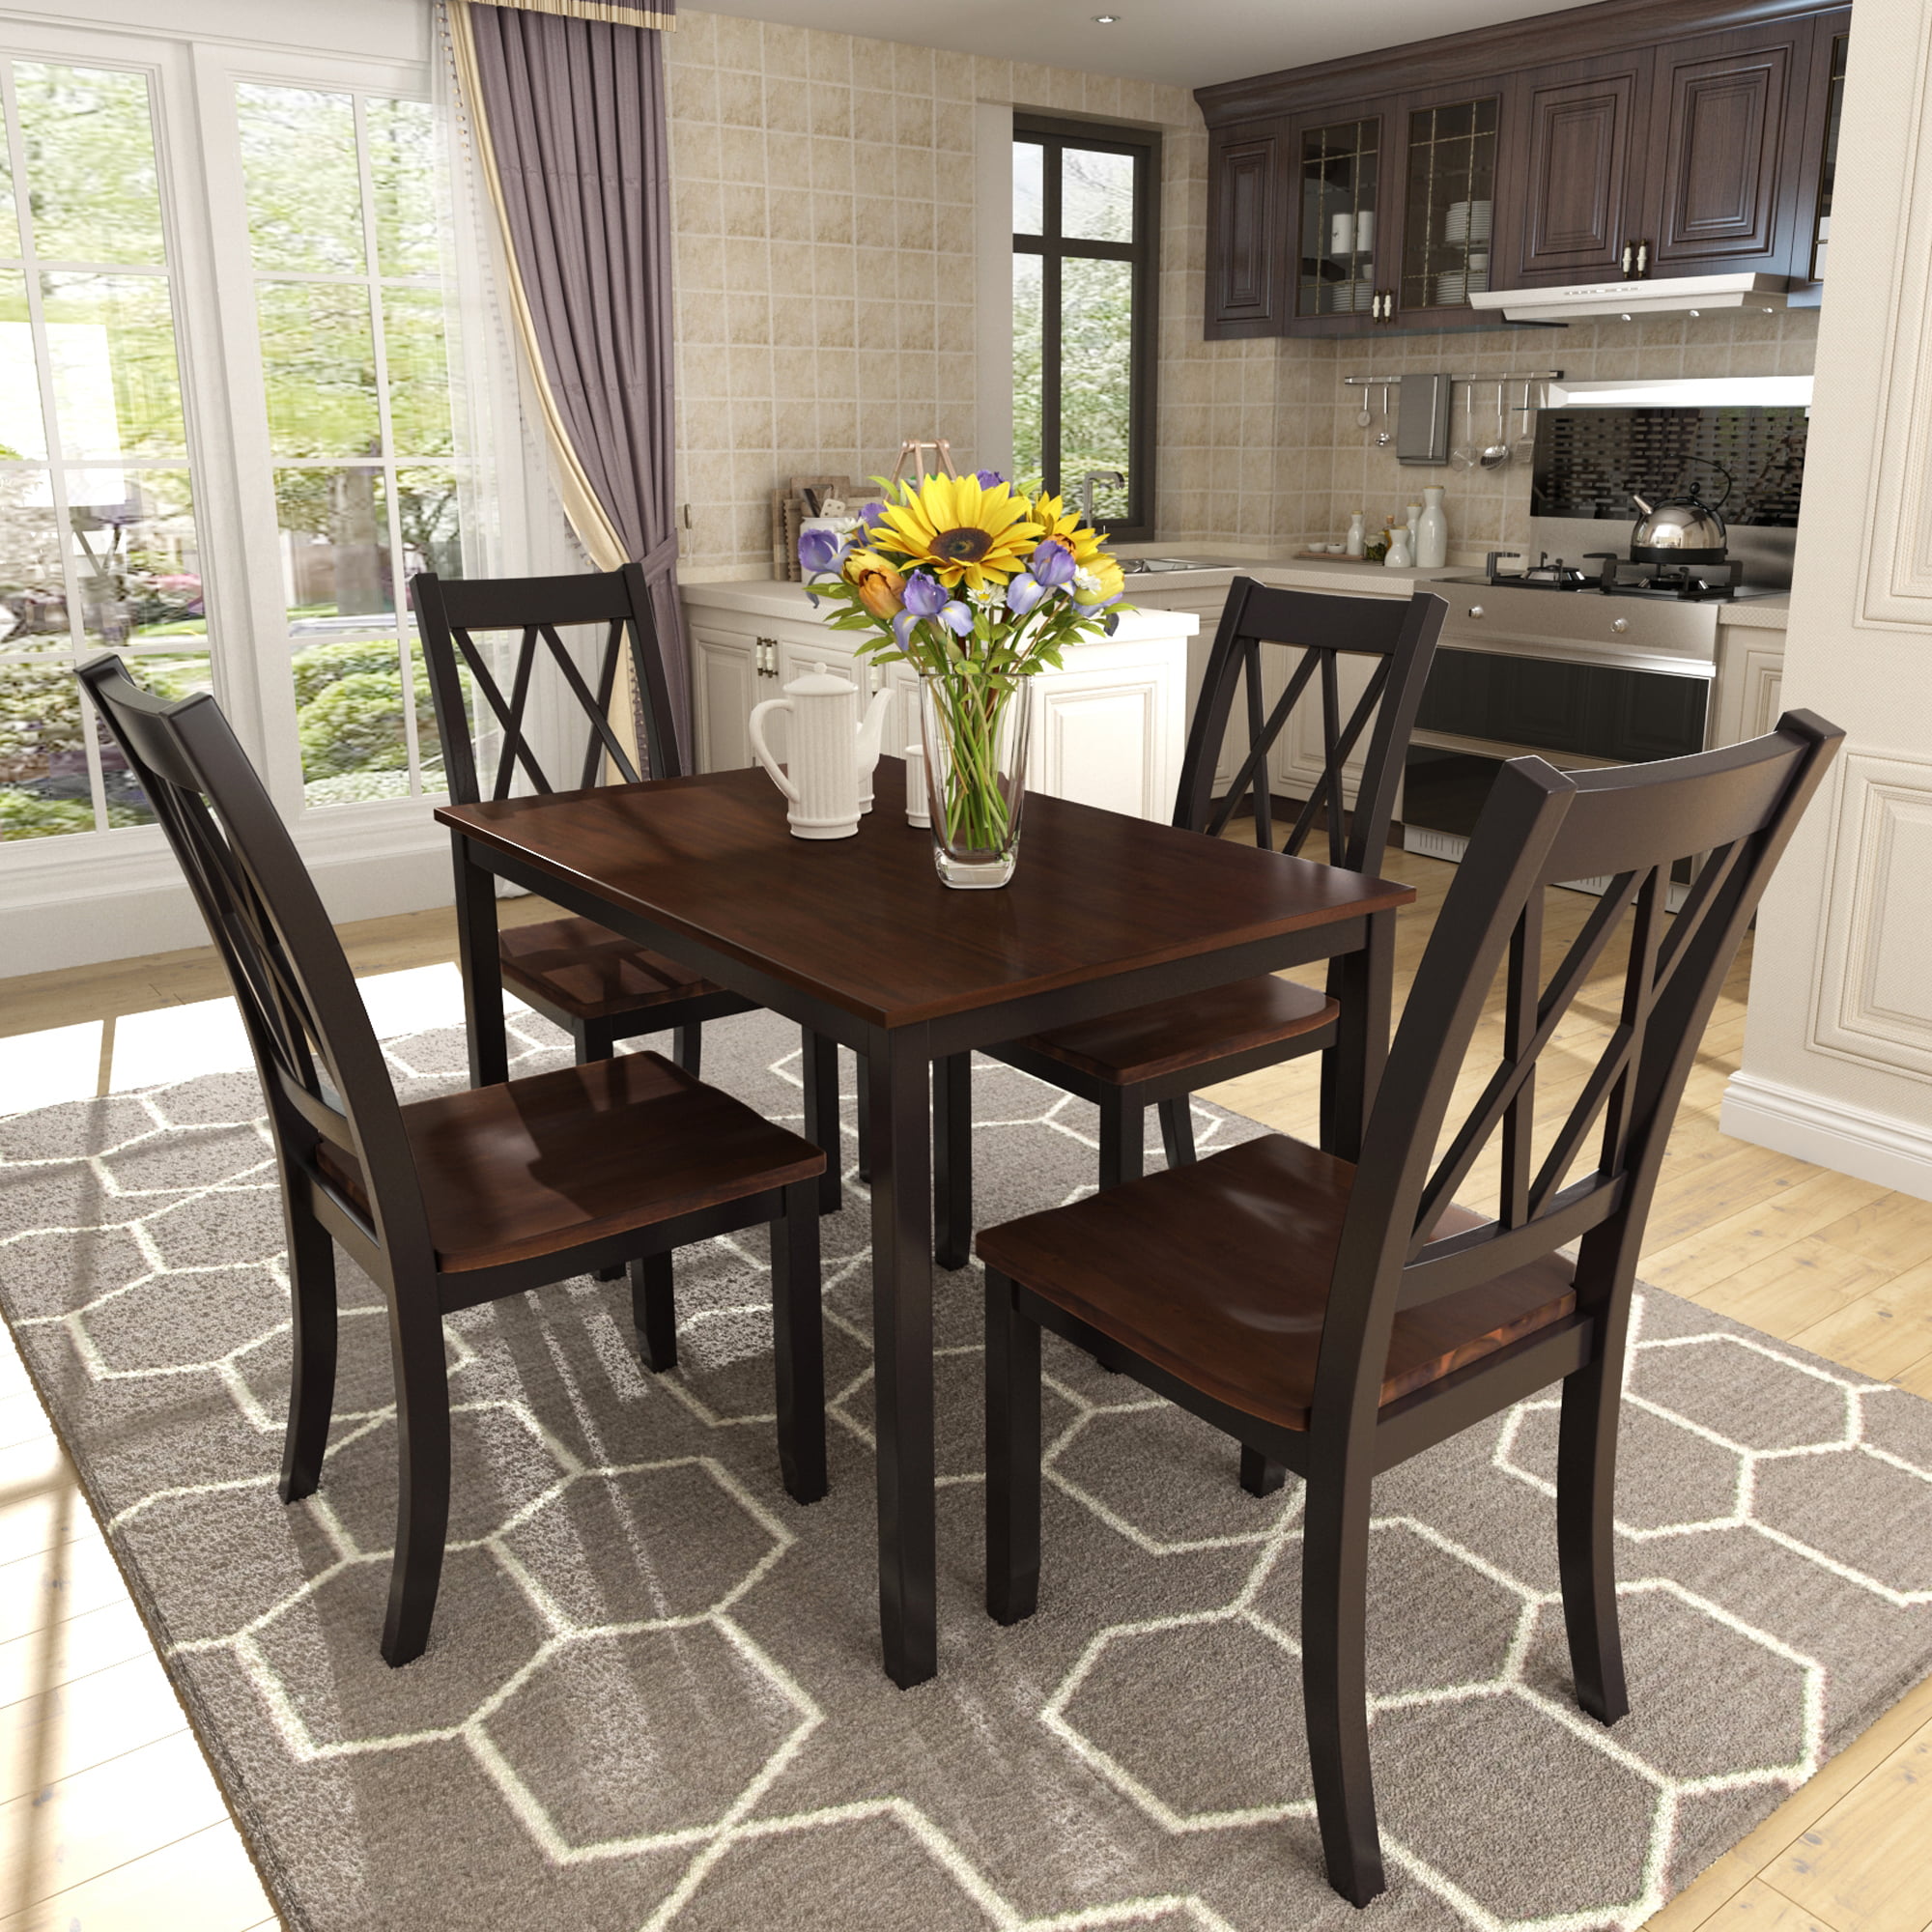 Wooden Kitchen Table and Chairs Set, 5 Piece Square Dining Table Set ...